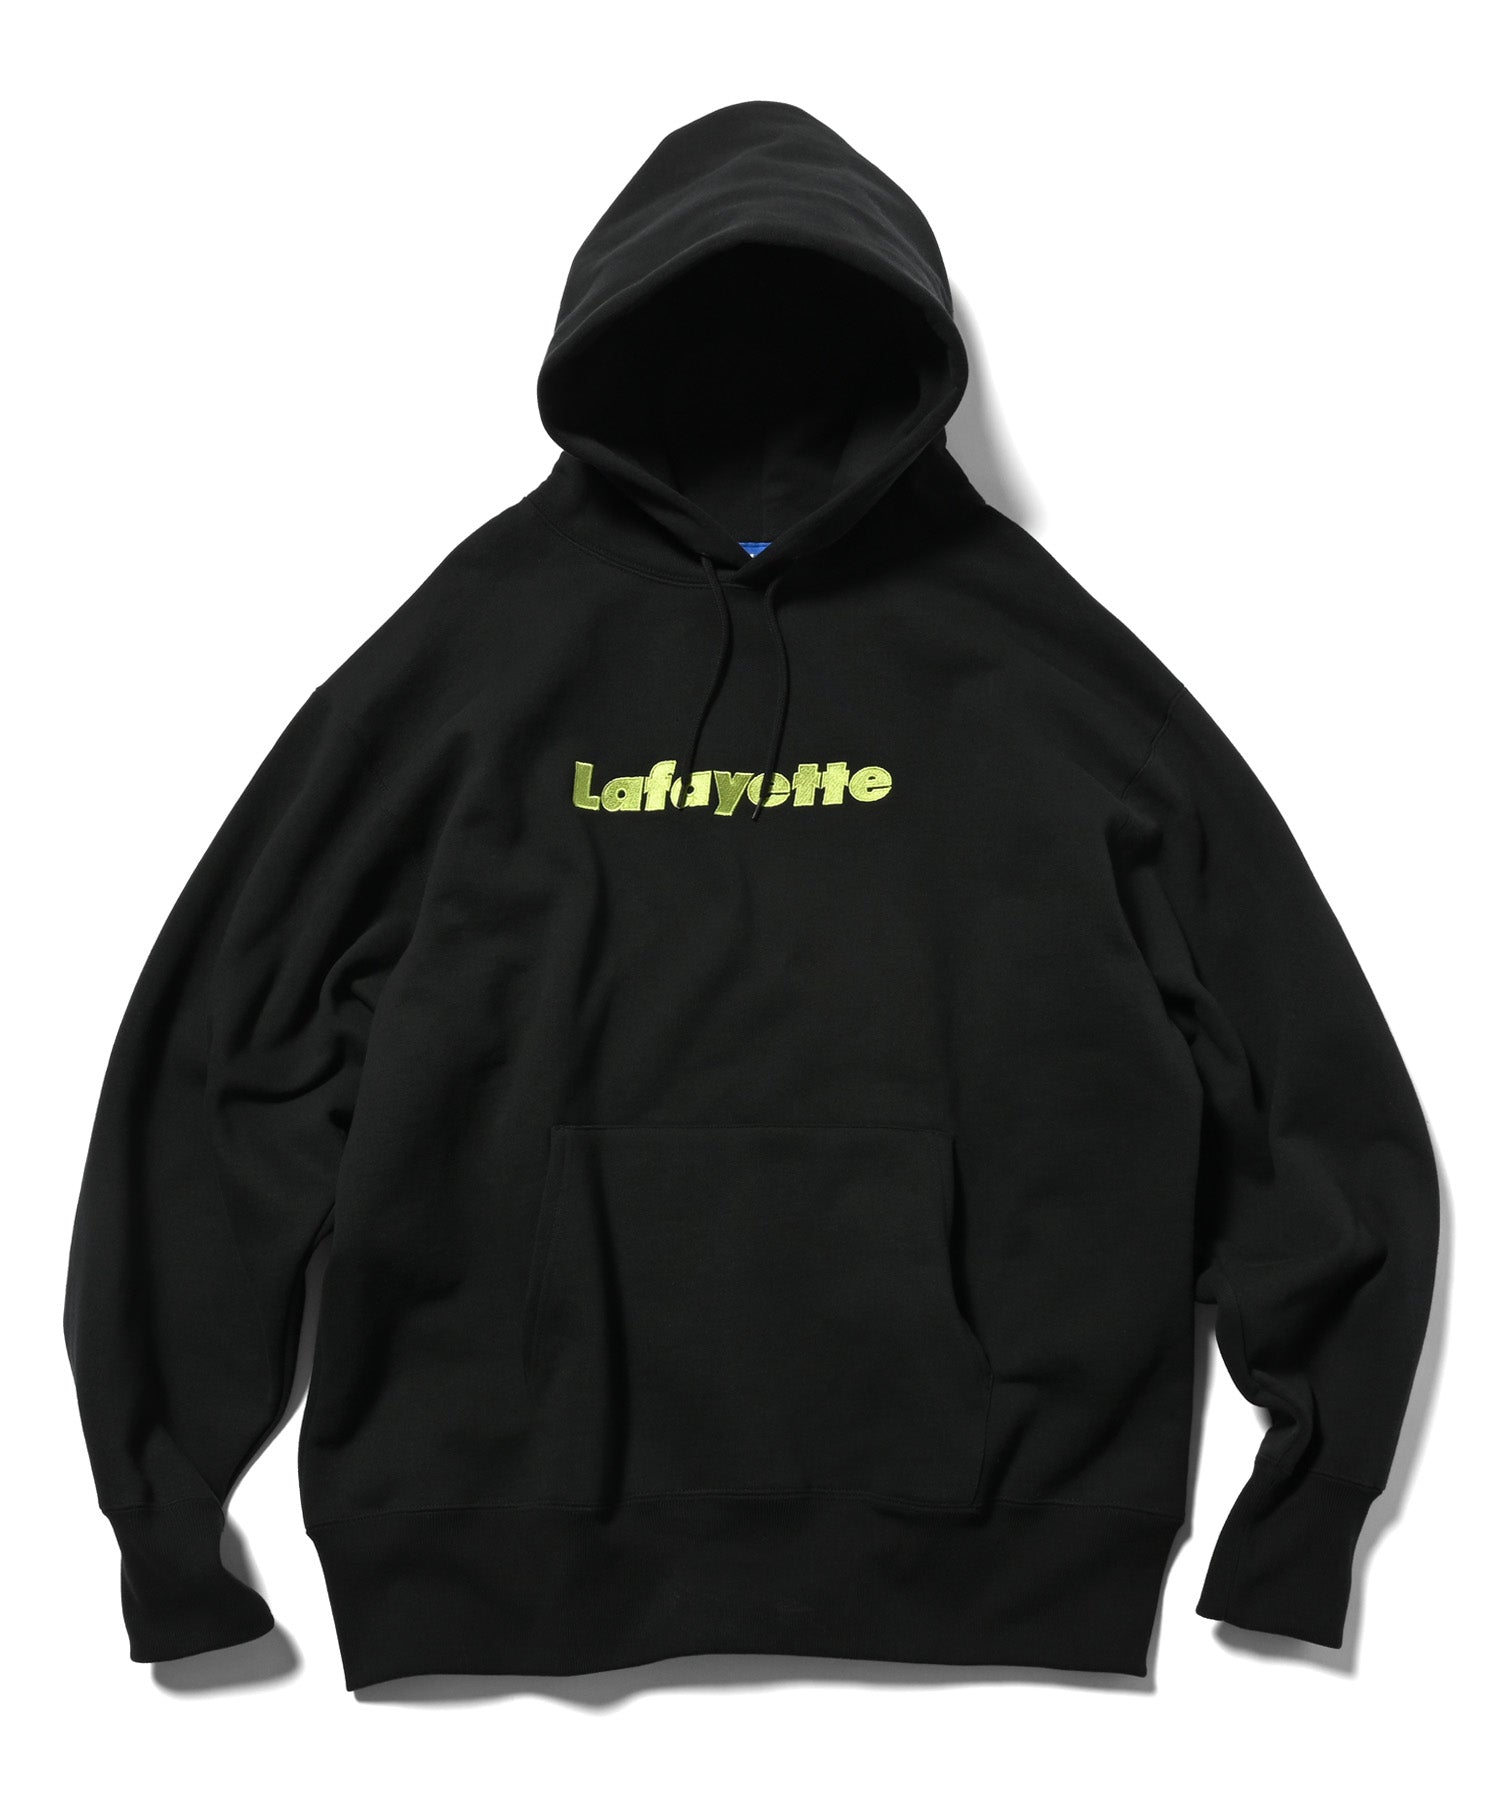 LFYT for Side-A (AKITA) Lafayette CORE LOGO HEAVY WEIGHT HOODIE  LE230504